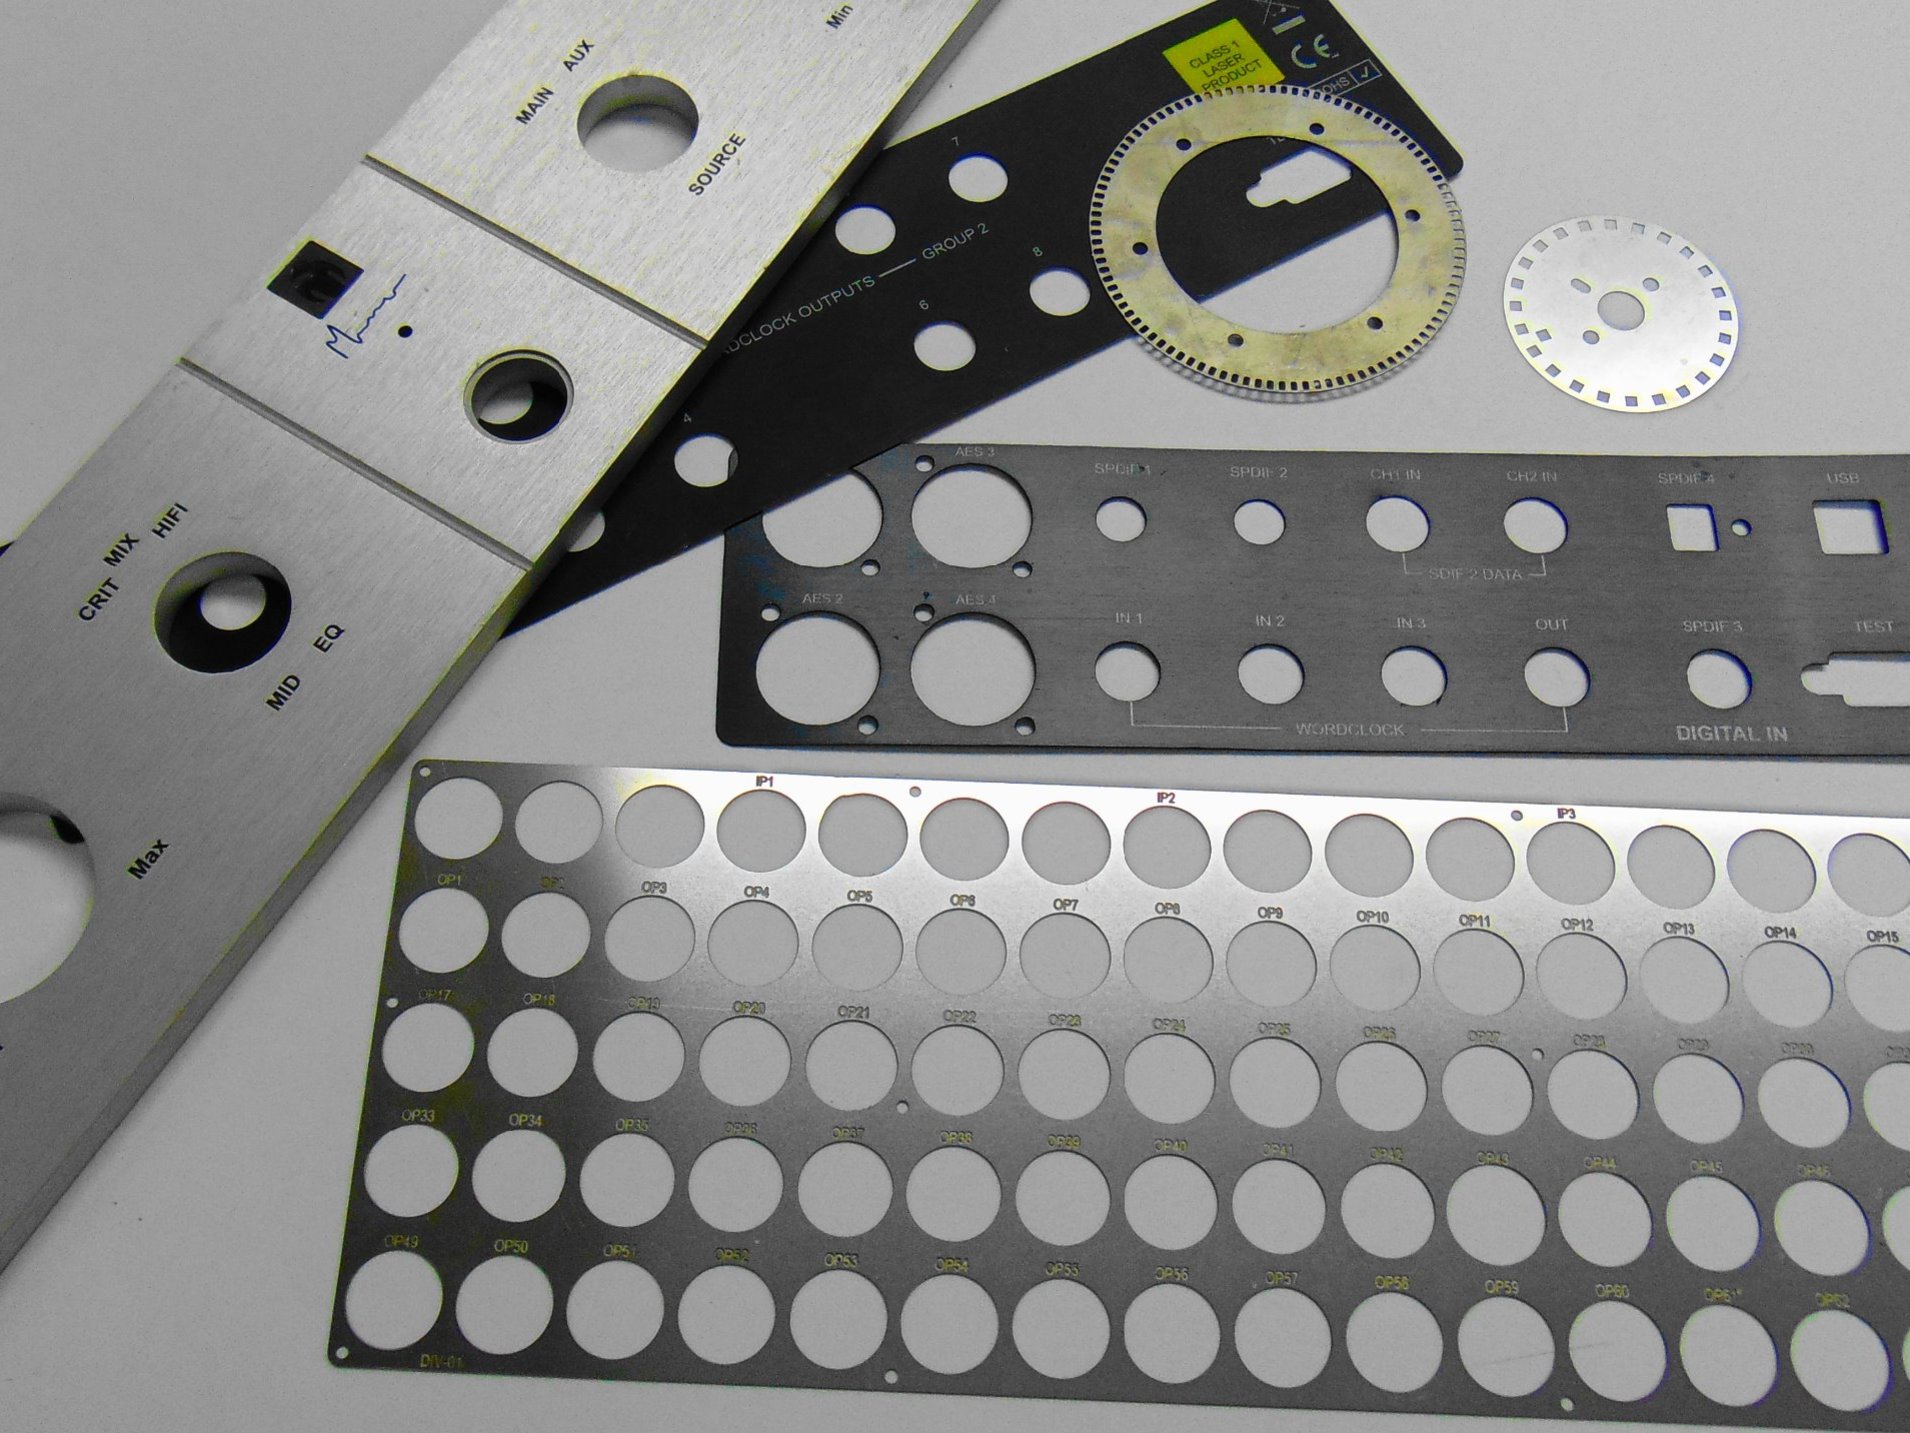 Aluminium facia for electronic equipment and aluminium parts manufactured by Etch Tech using chemical etching.